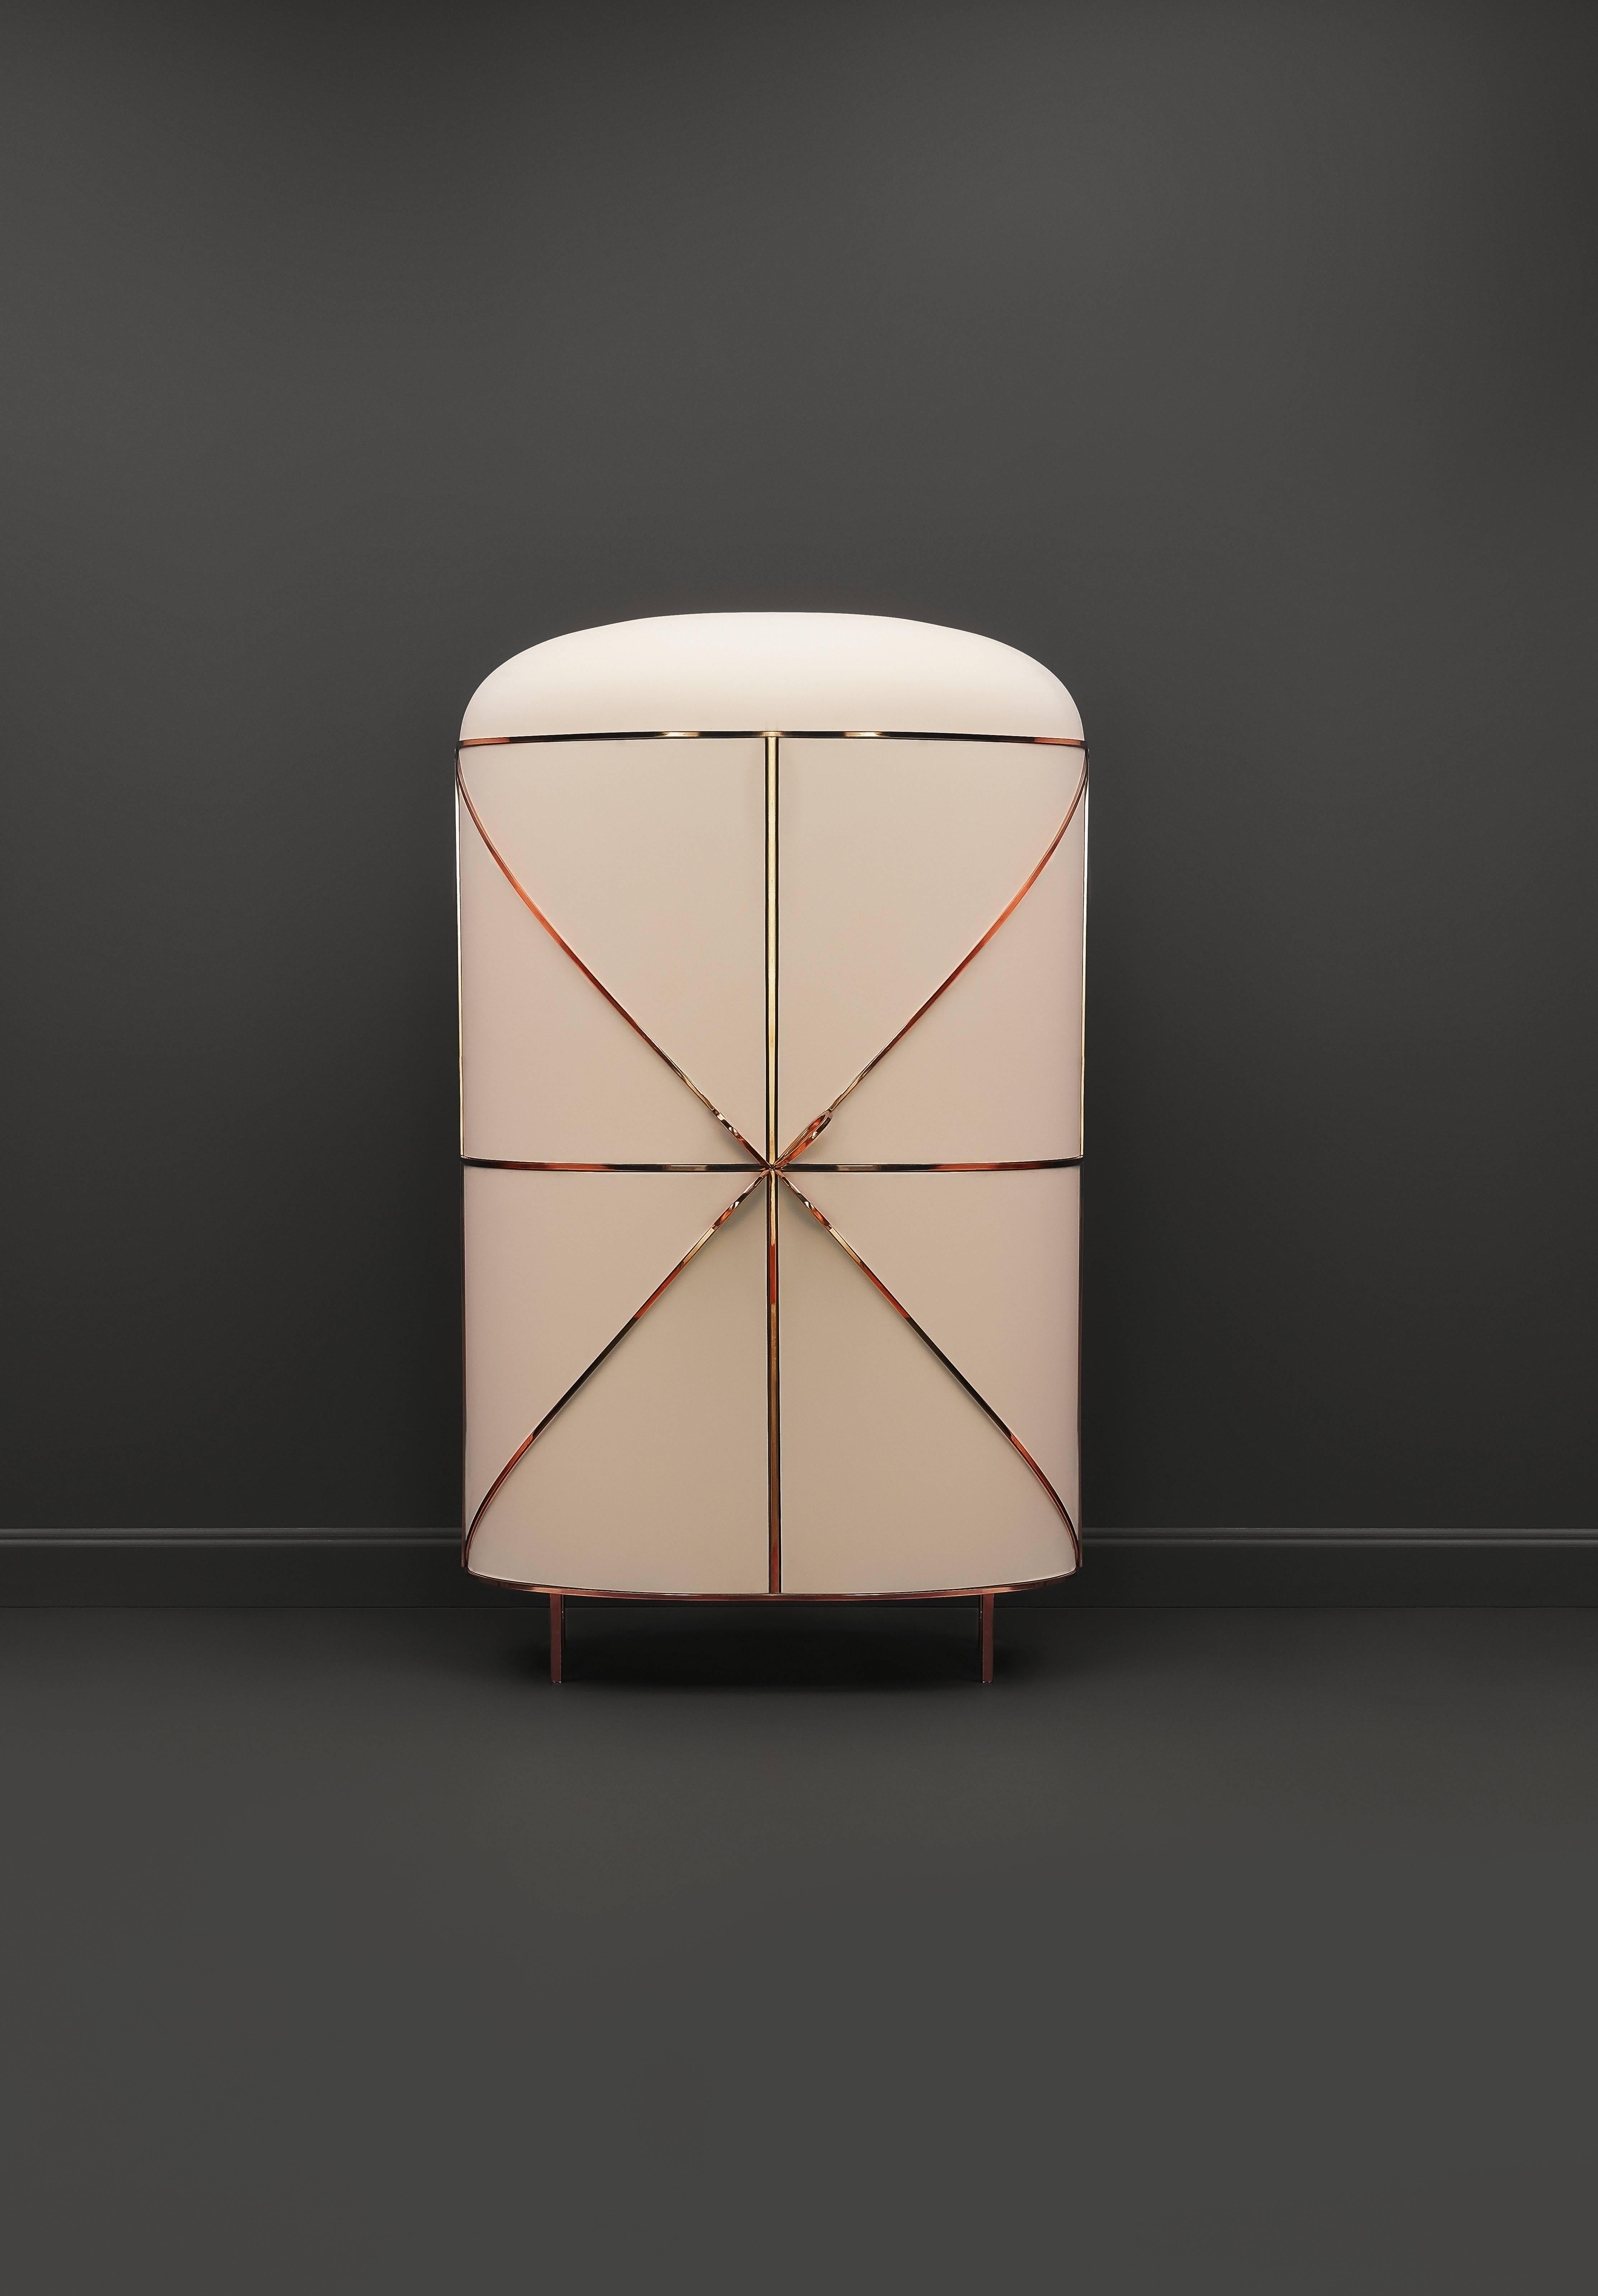 88 Secrets Bar by Nika Zupanc is a bar cabinet inspired by feminine lines with luxurious metal trims in gold or rose gold. 

The piece is handmade in India by Scarlet Splendour, a company founded in 2014 by Ashish Bajoria and Suman Kanodia, siblings